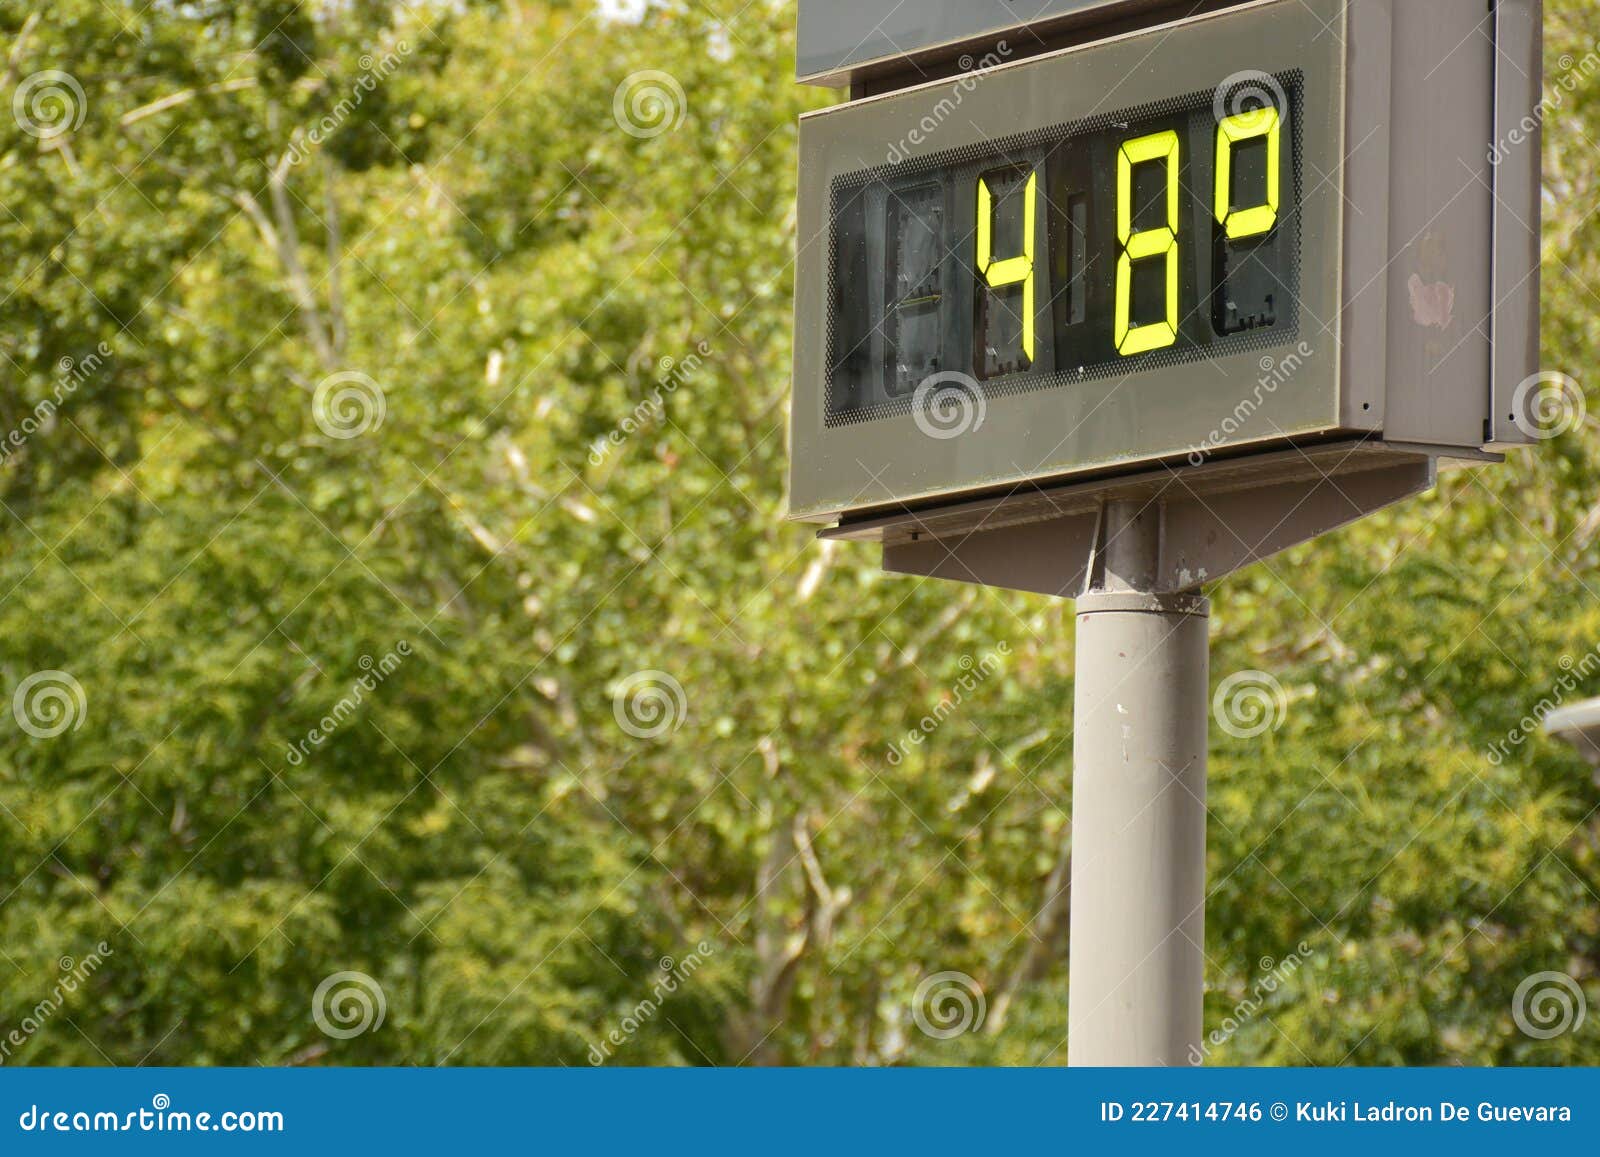 street thermometer marking 48 degrees